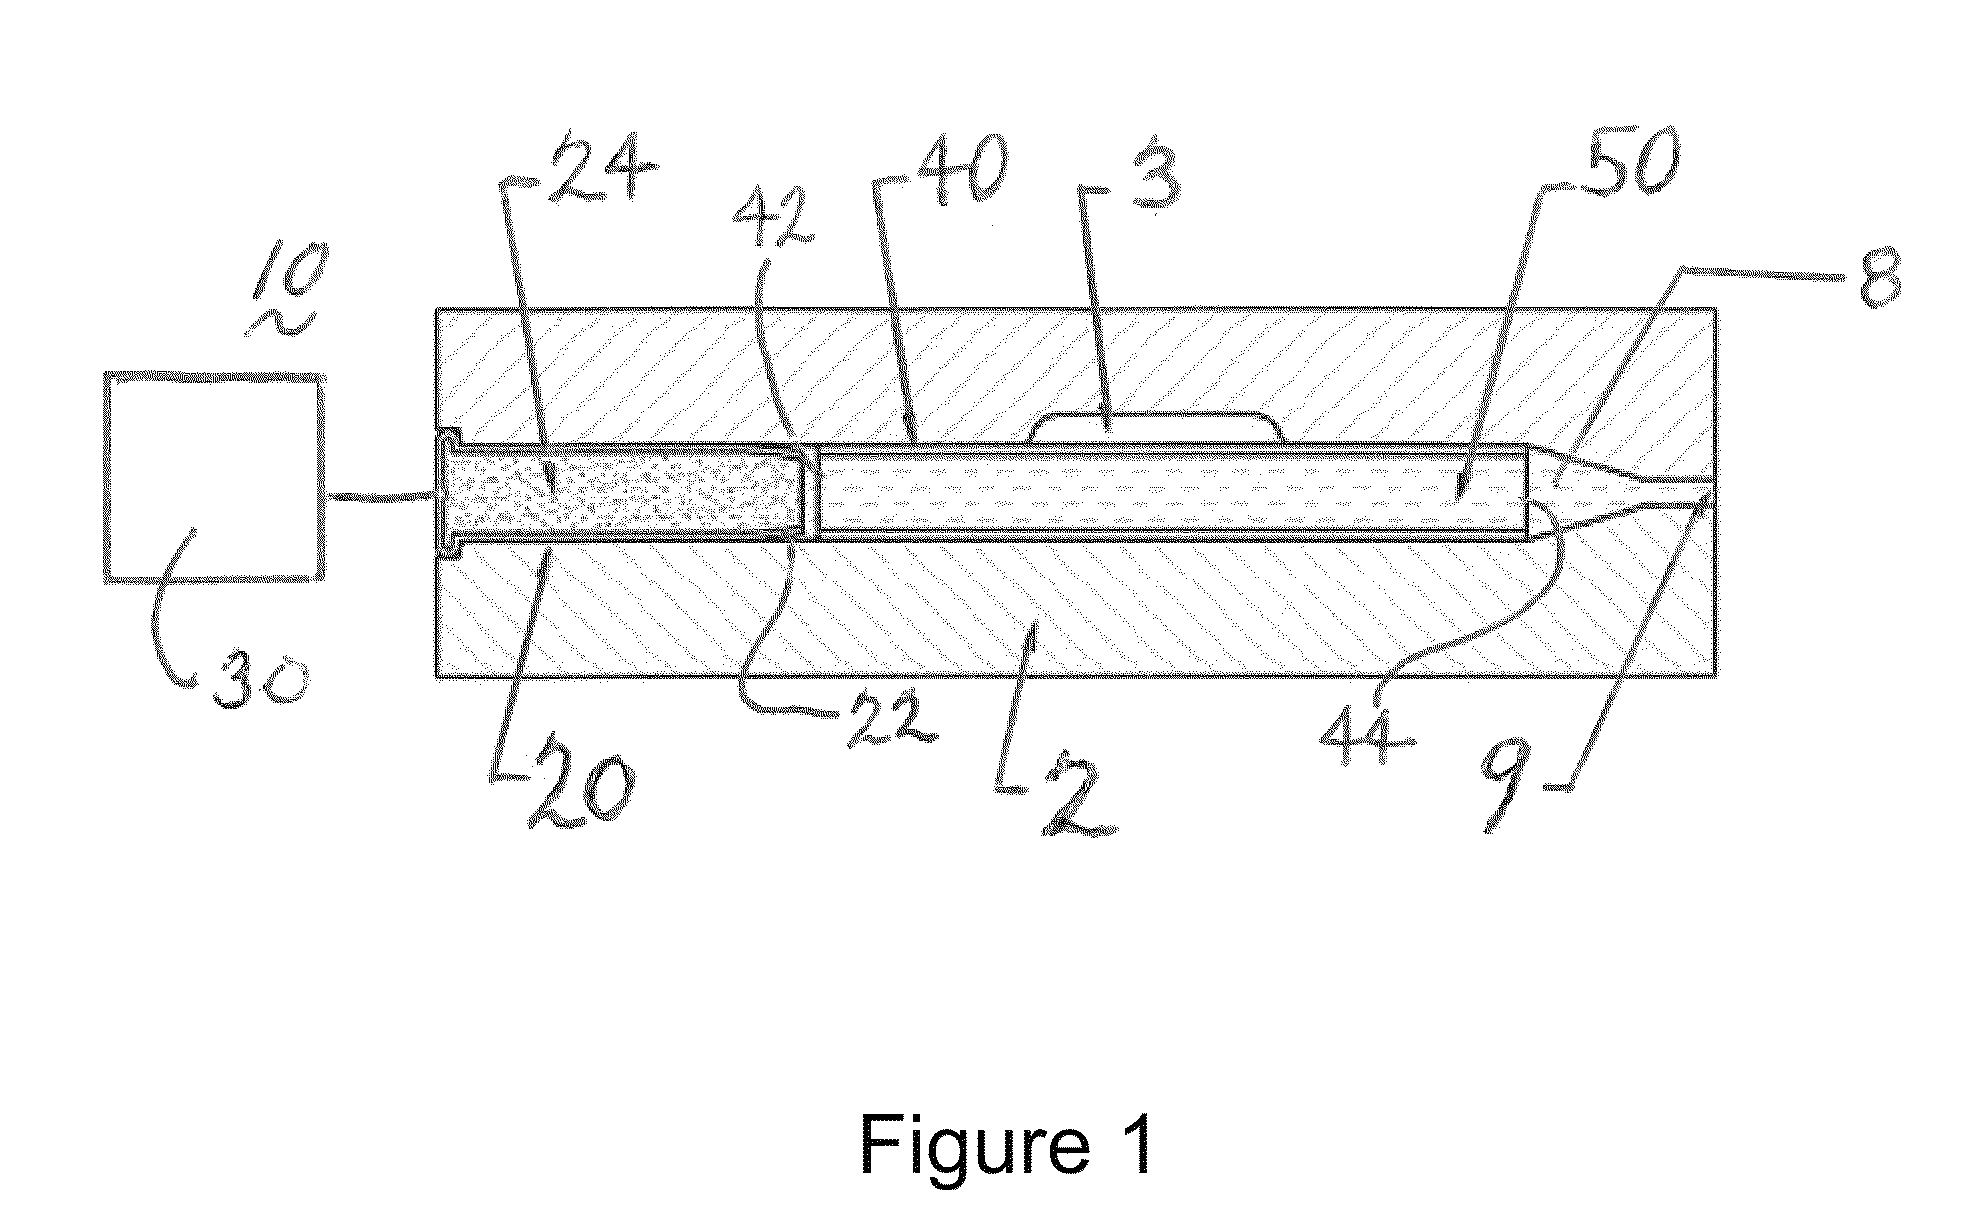 System and method for forming of tubular parts